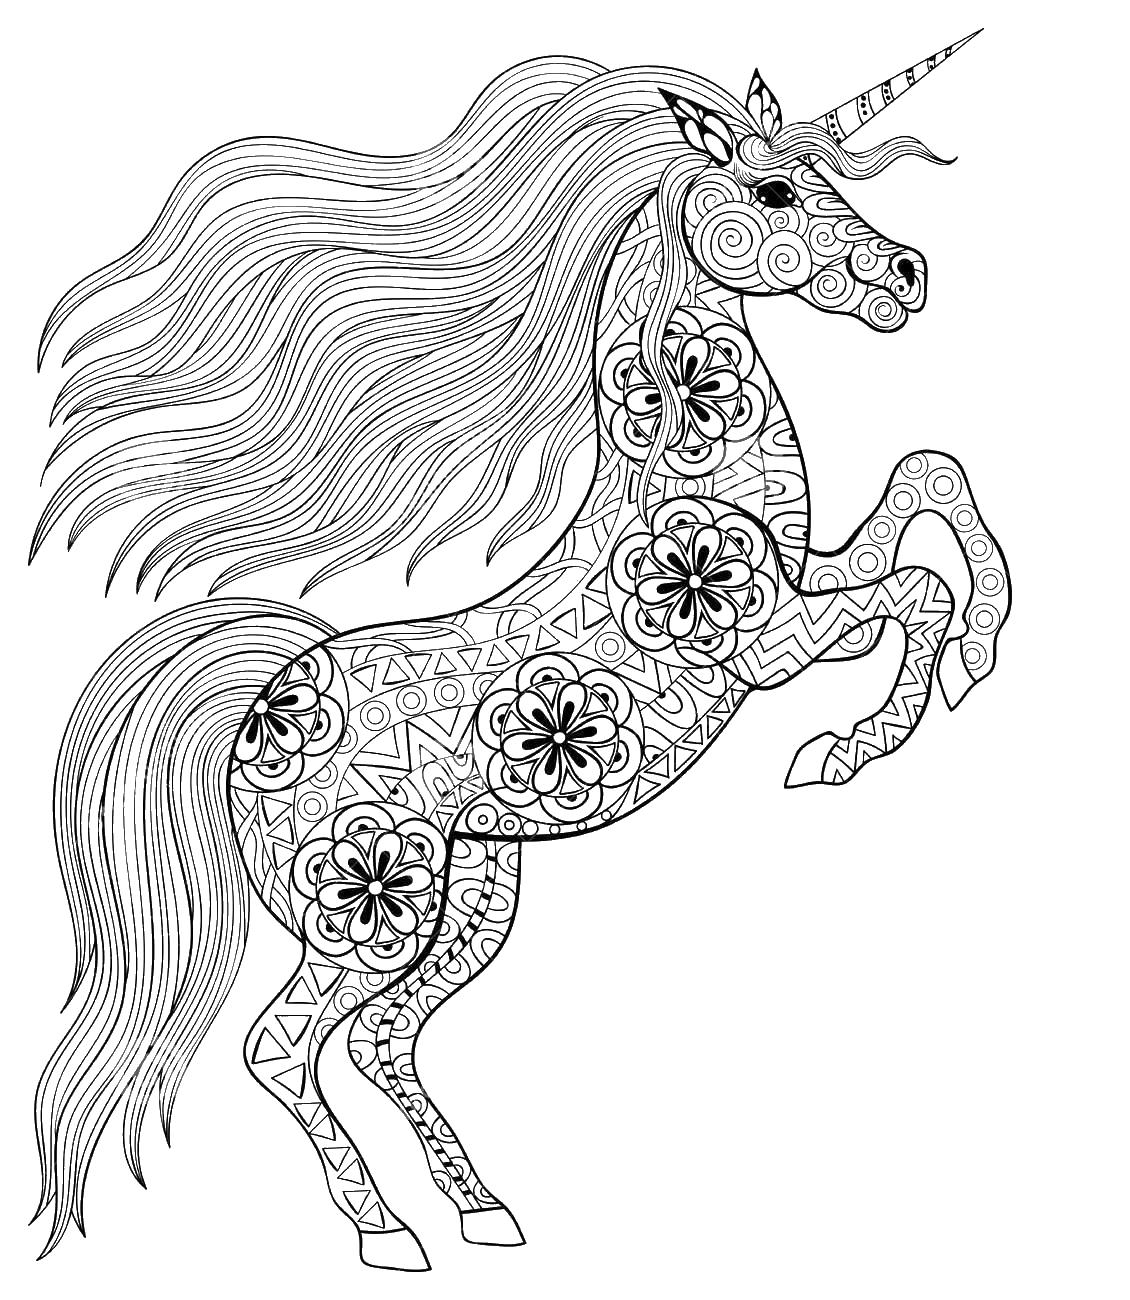 Coloring pages anti-stress for children to download and ...